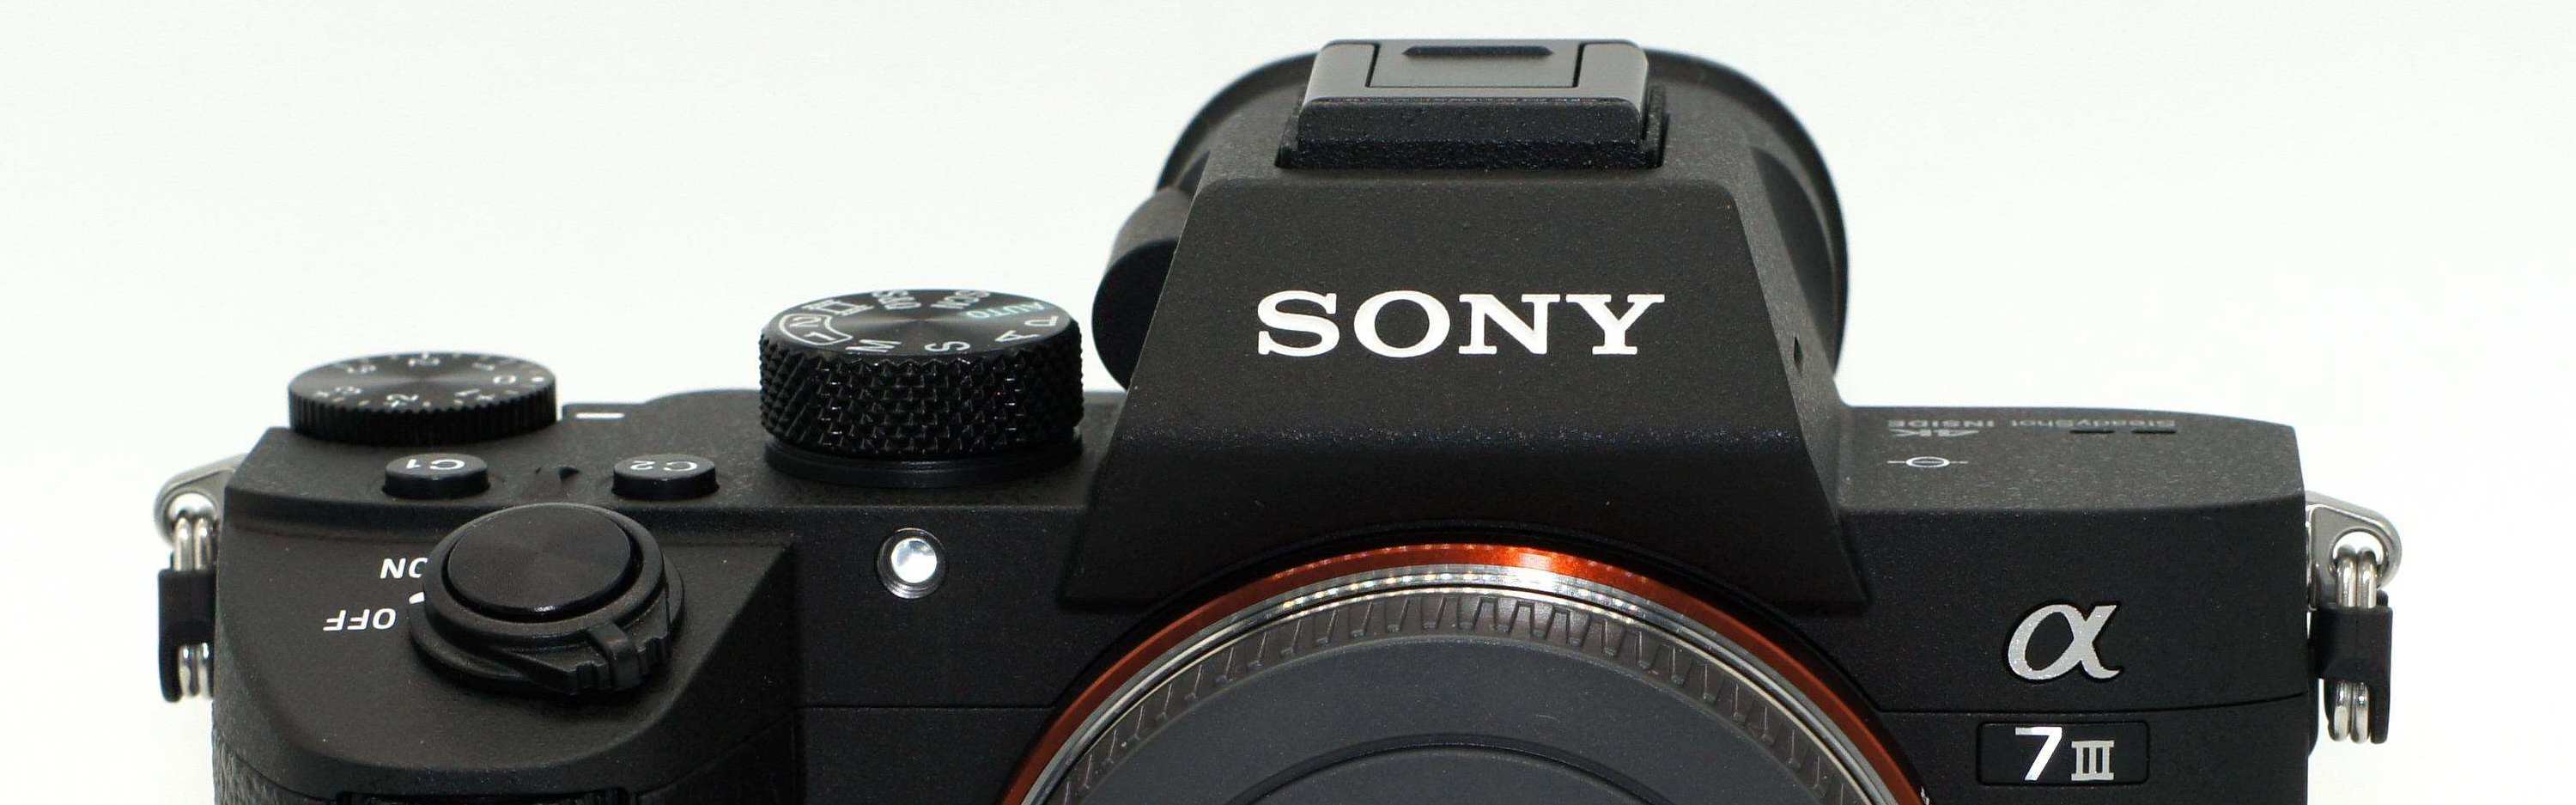 Sony DSC-H3: Digital Photography Review